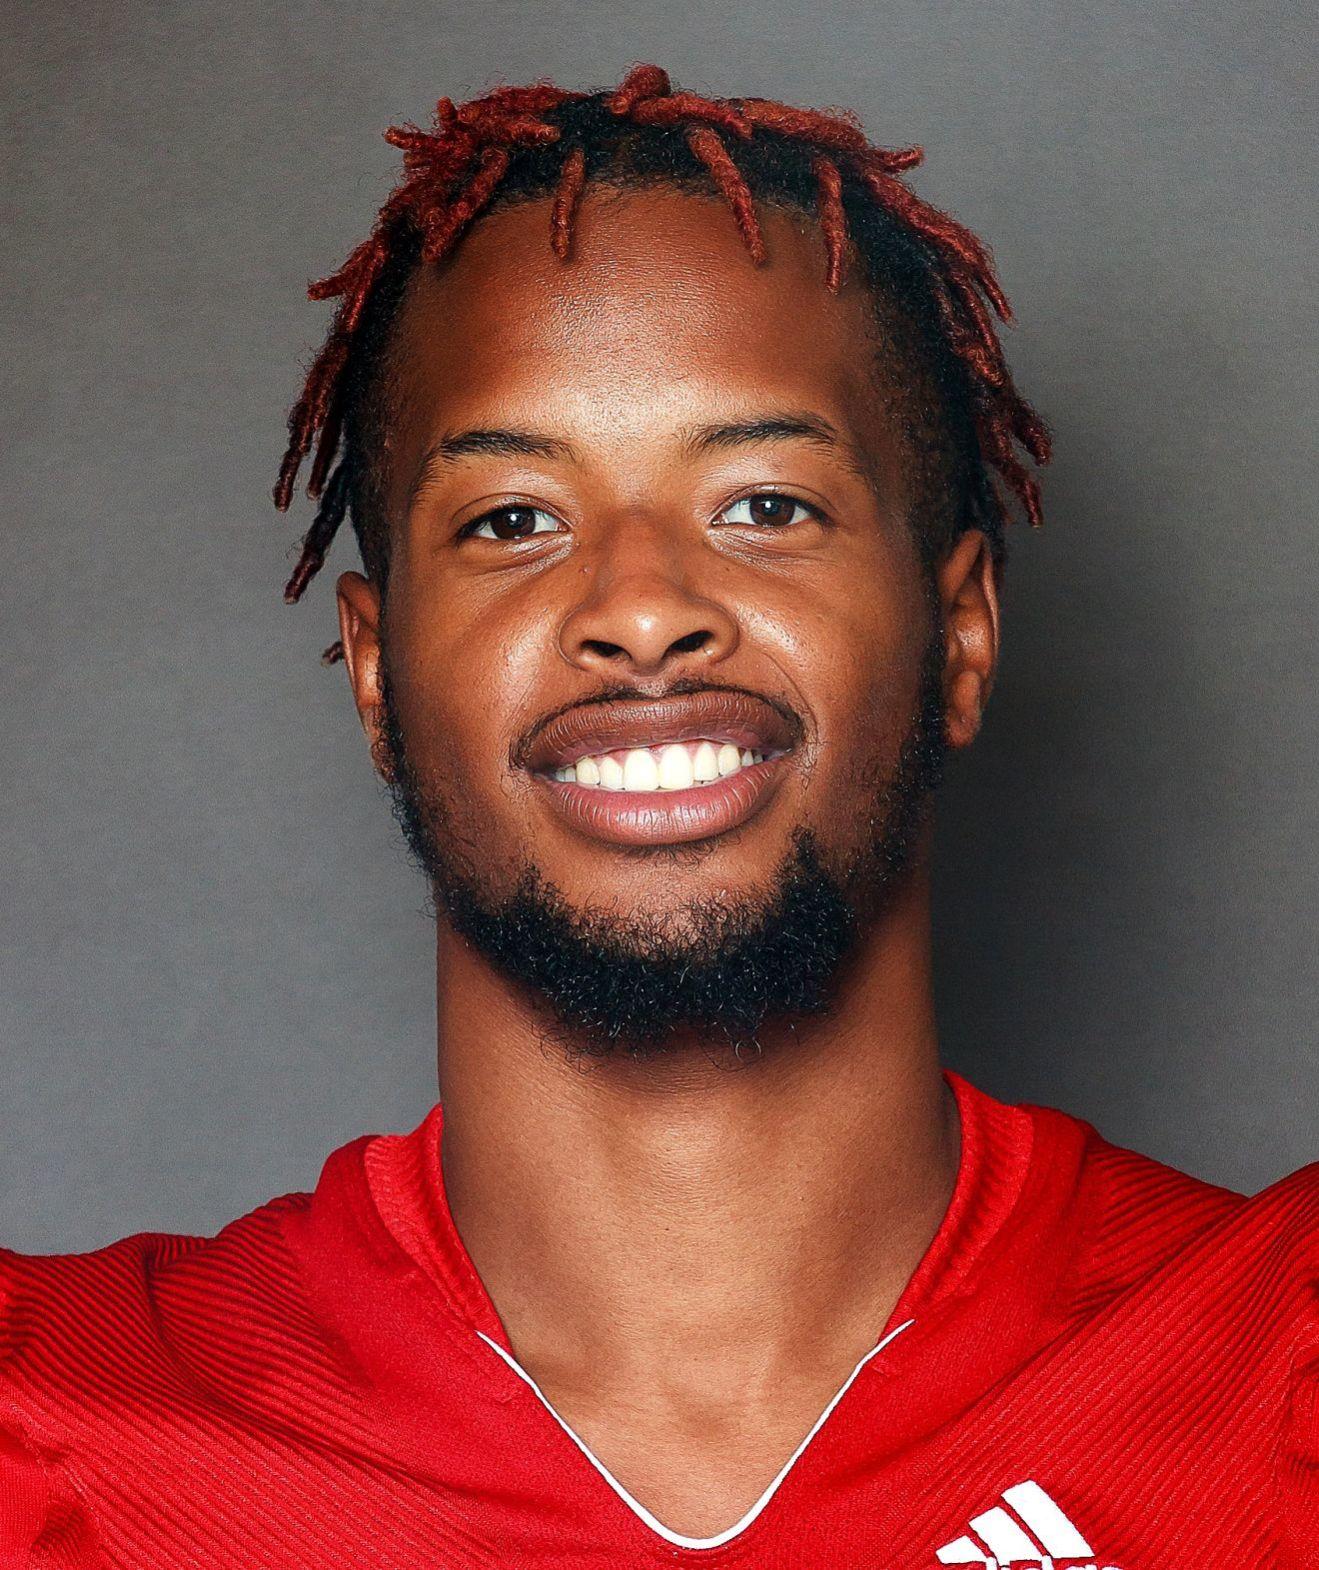 Former Gator football standout earns allconference honors at West